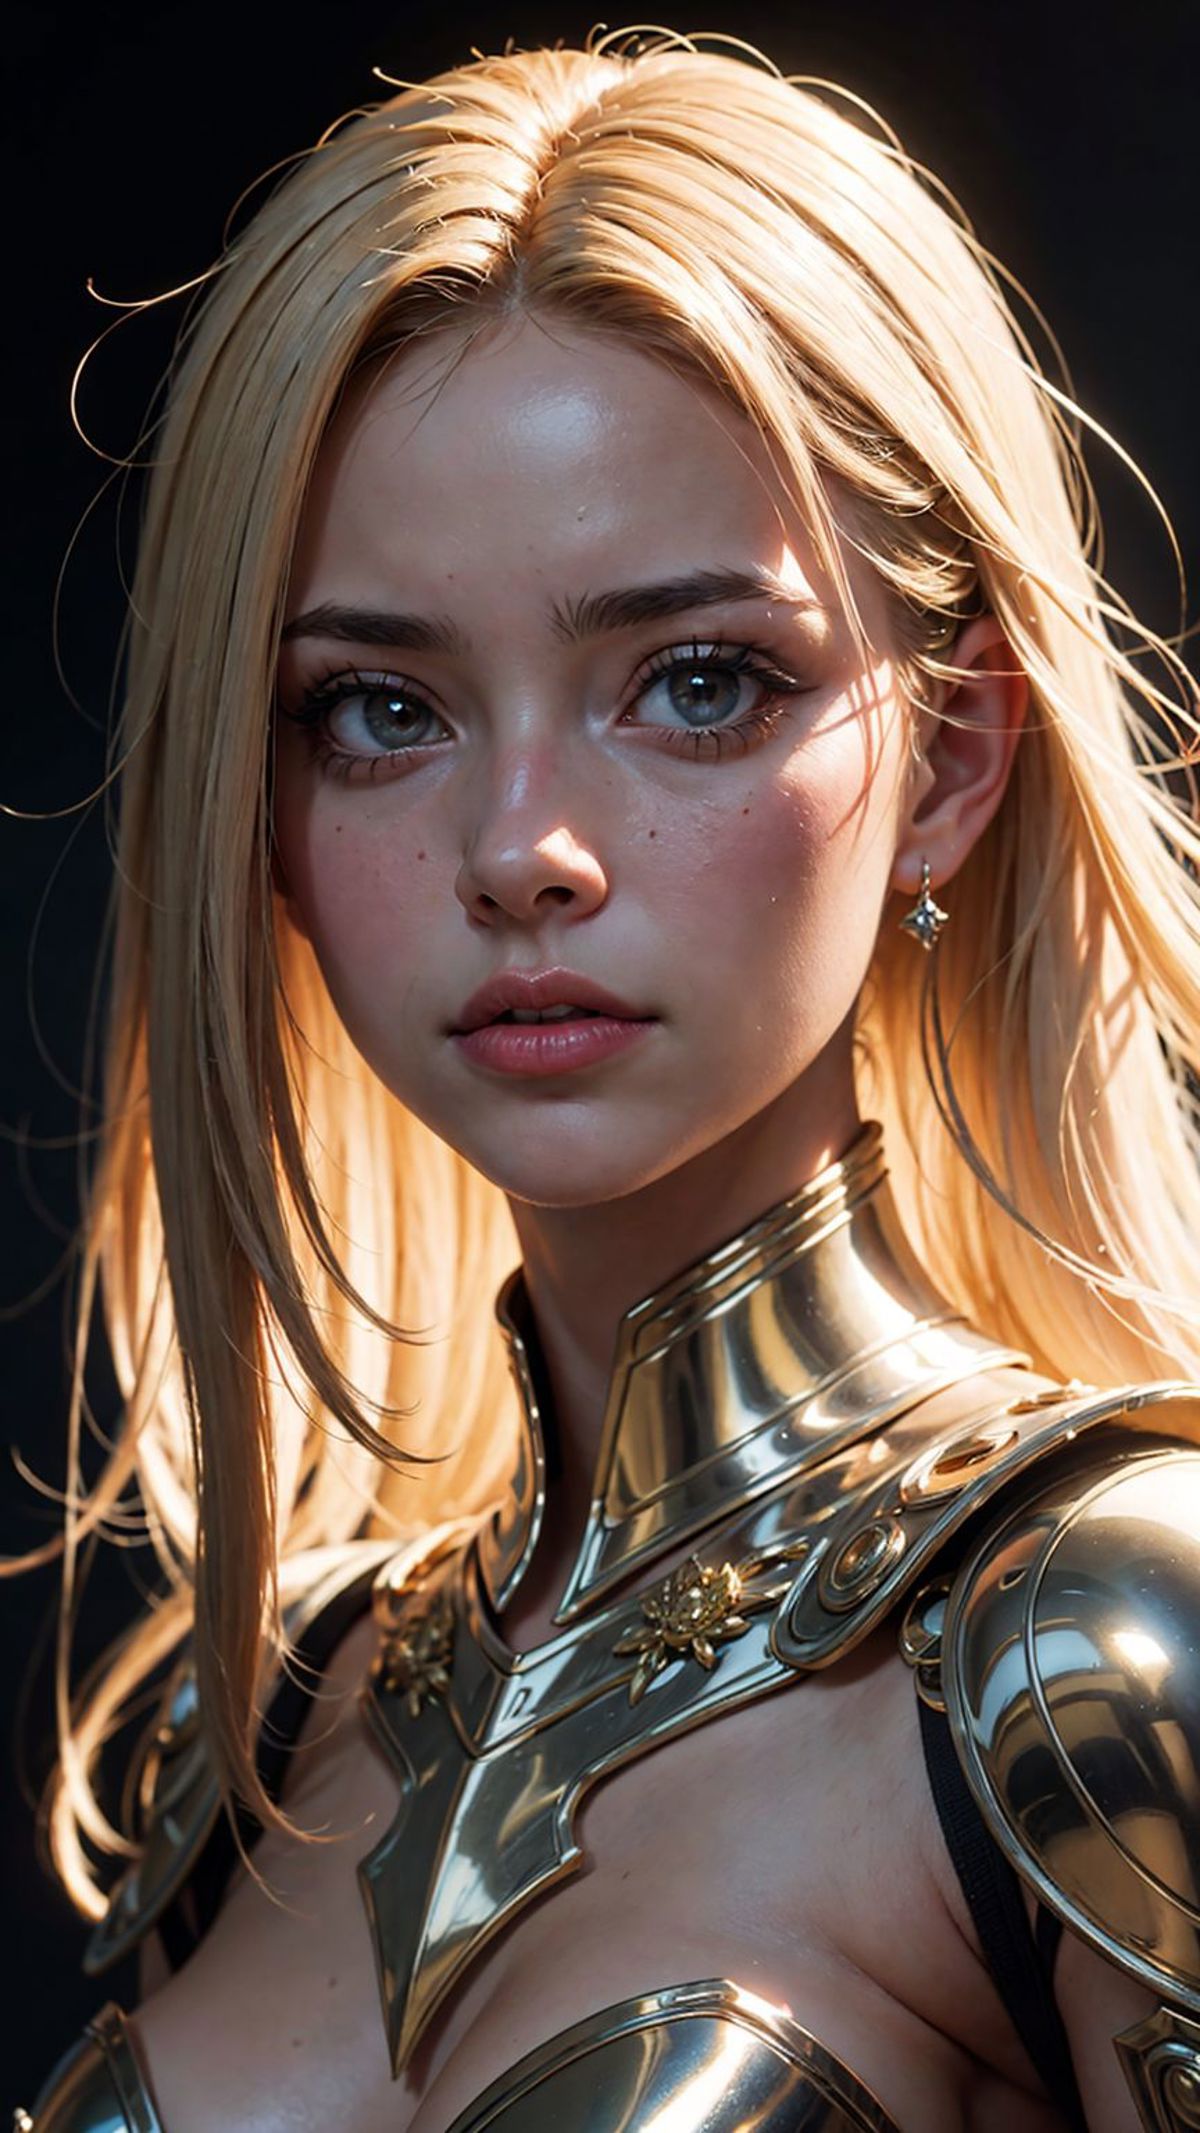 Blonde Haired Woman in Golden Armor with Dangling Earrings.